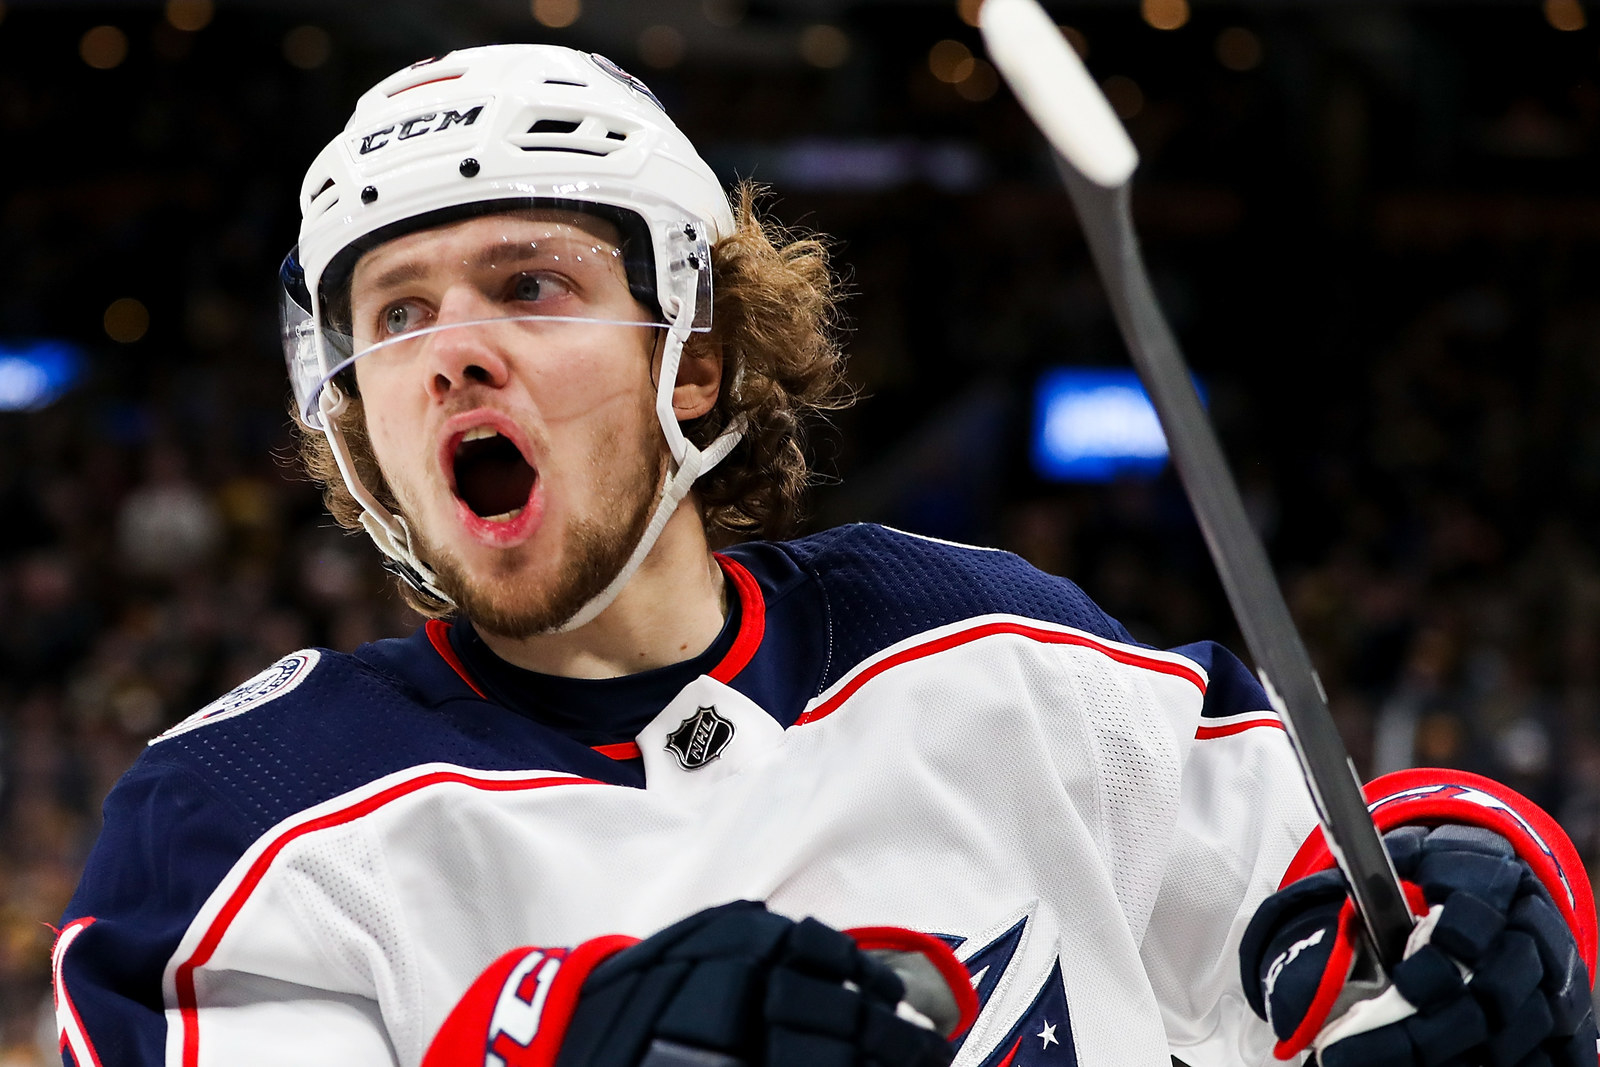 Russian Authorities Press Charges Against NHL Star Artemi Panarin